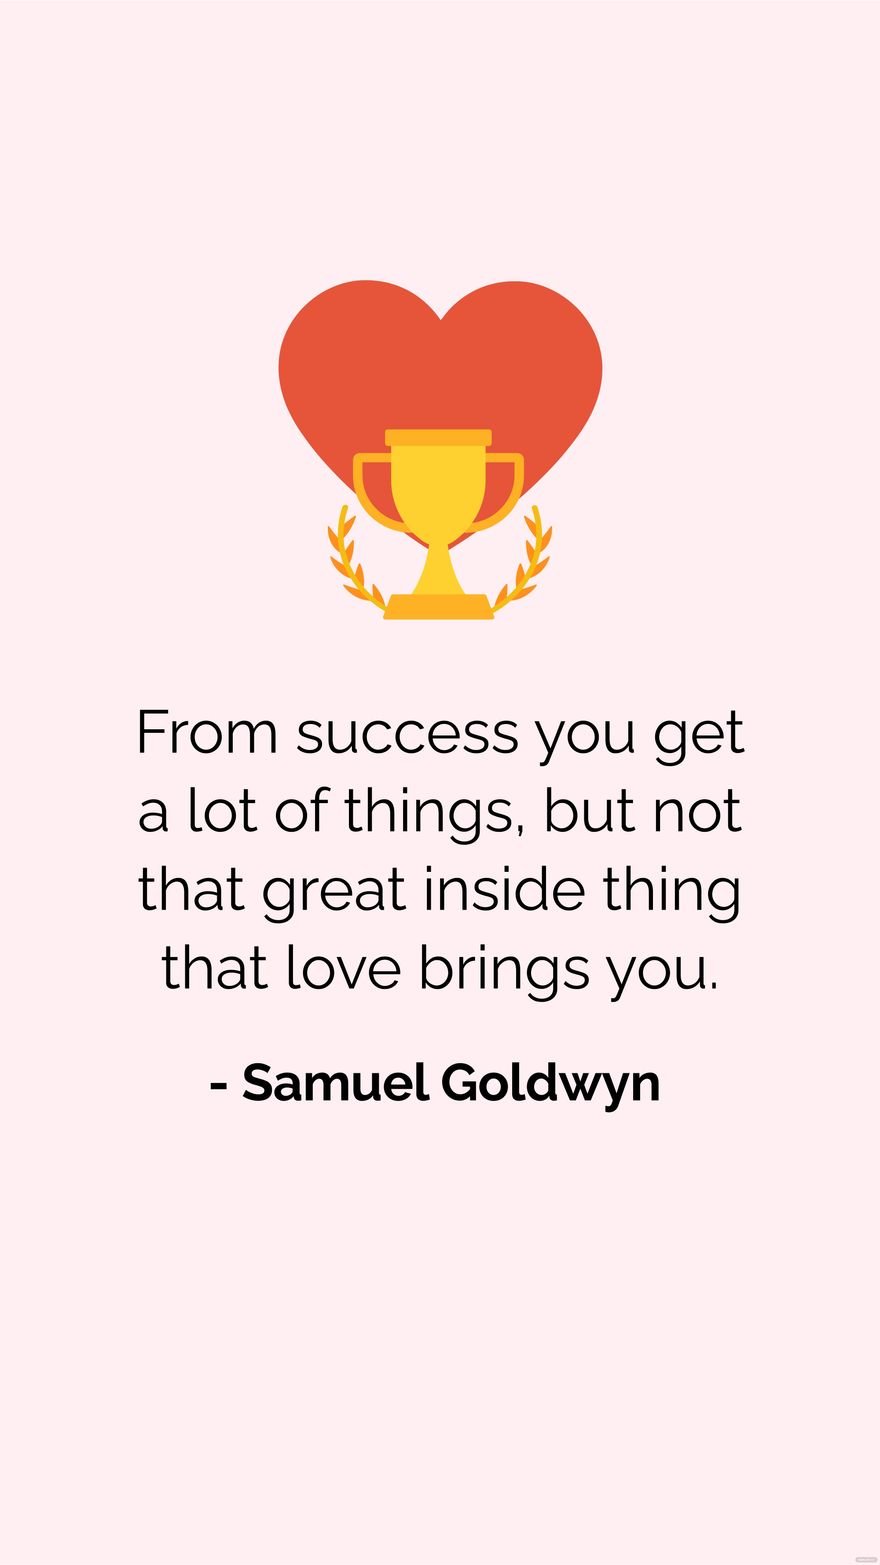 Samuel Goldwyn - From success you get a lot of things, but not that great inside thing that love brings you.